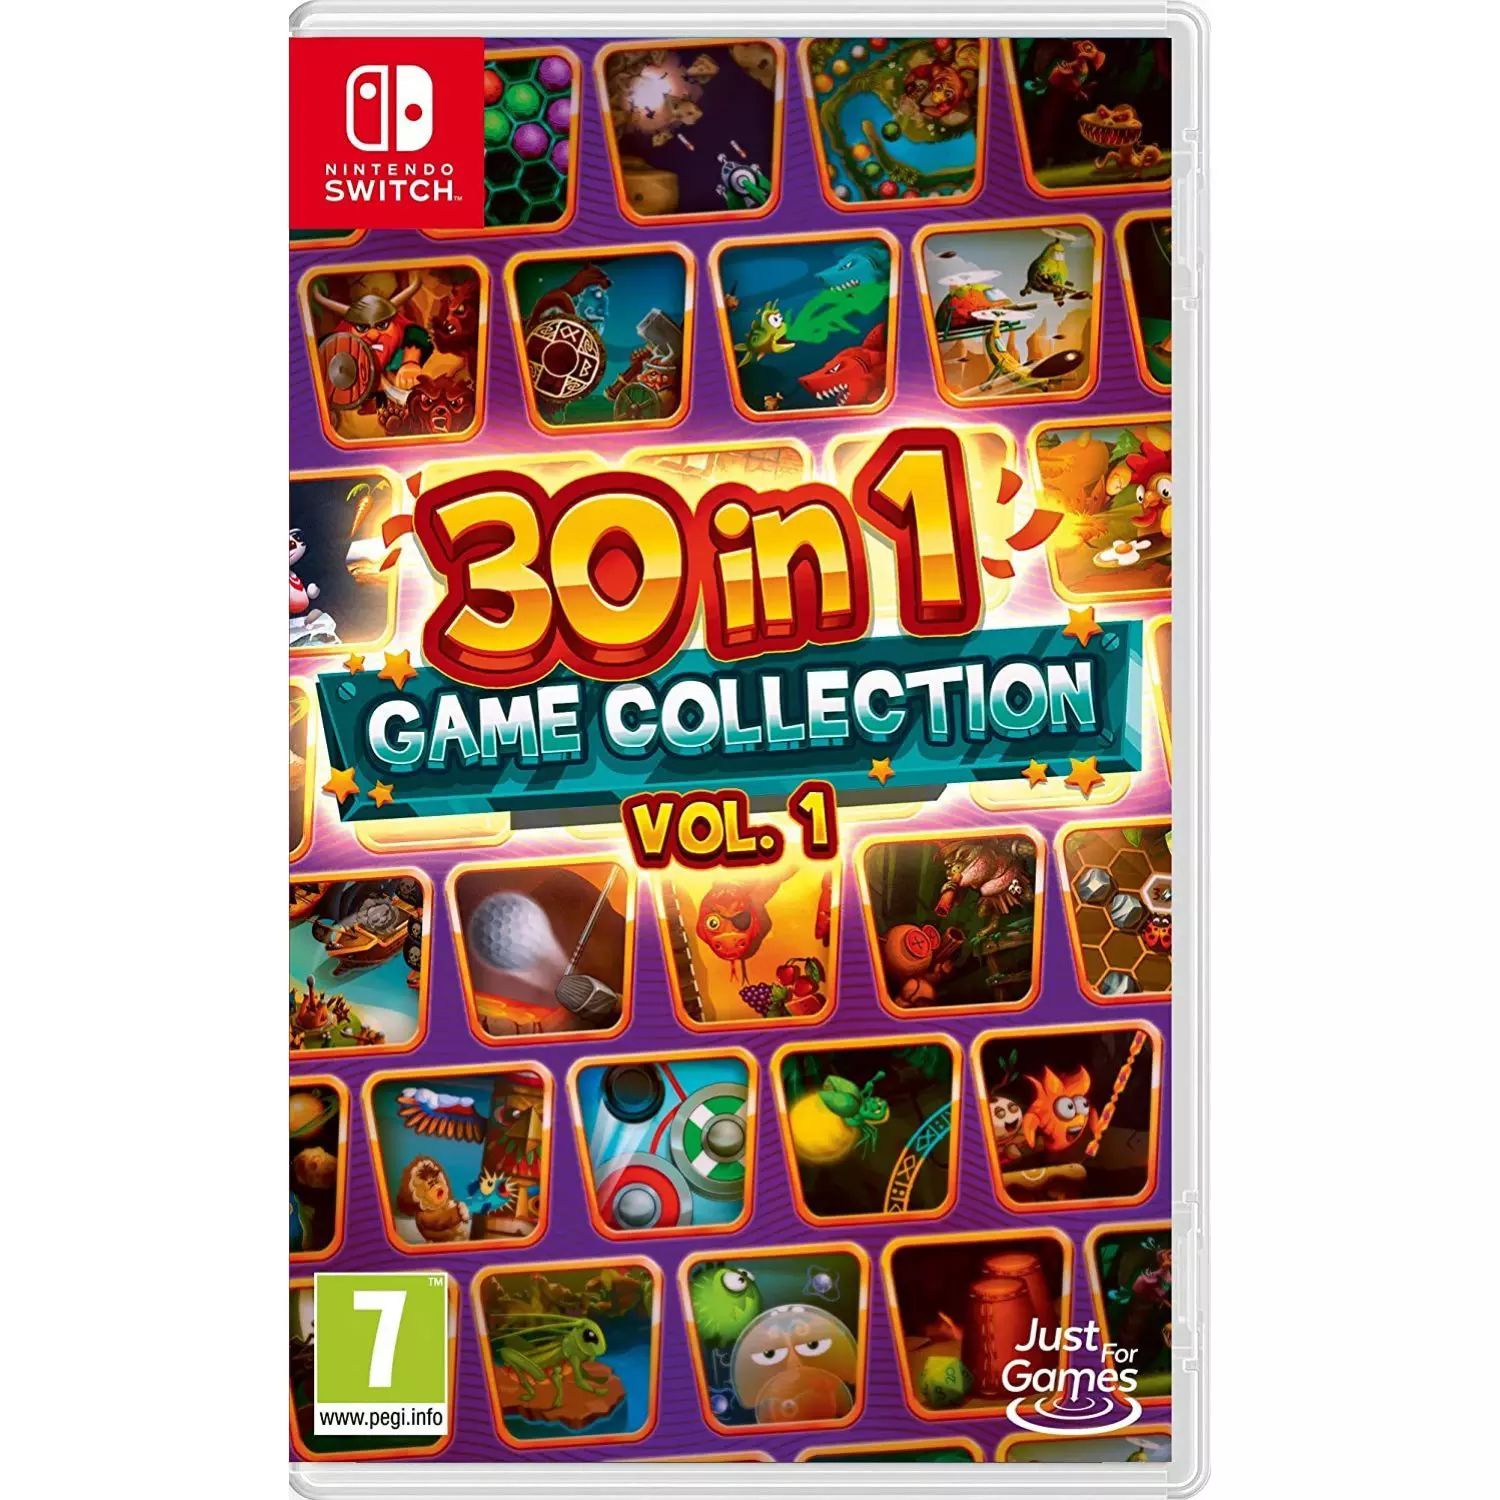 In-Game Collection Code In A Box